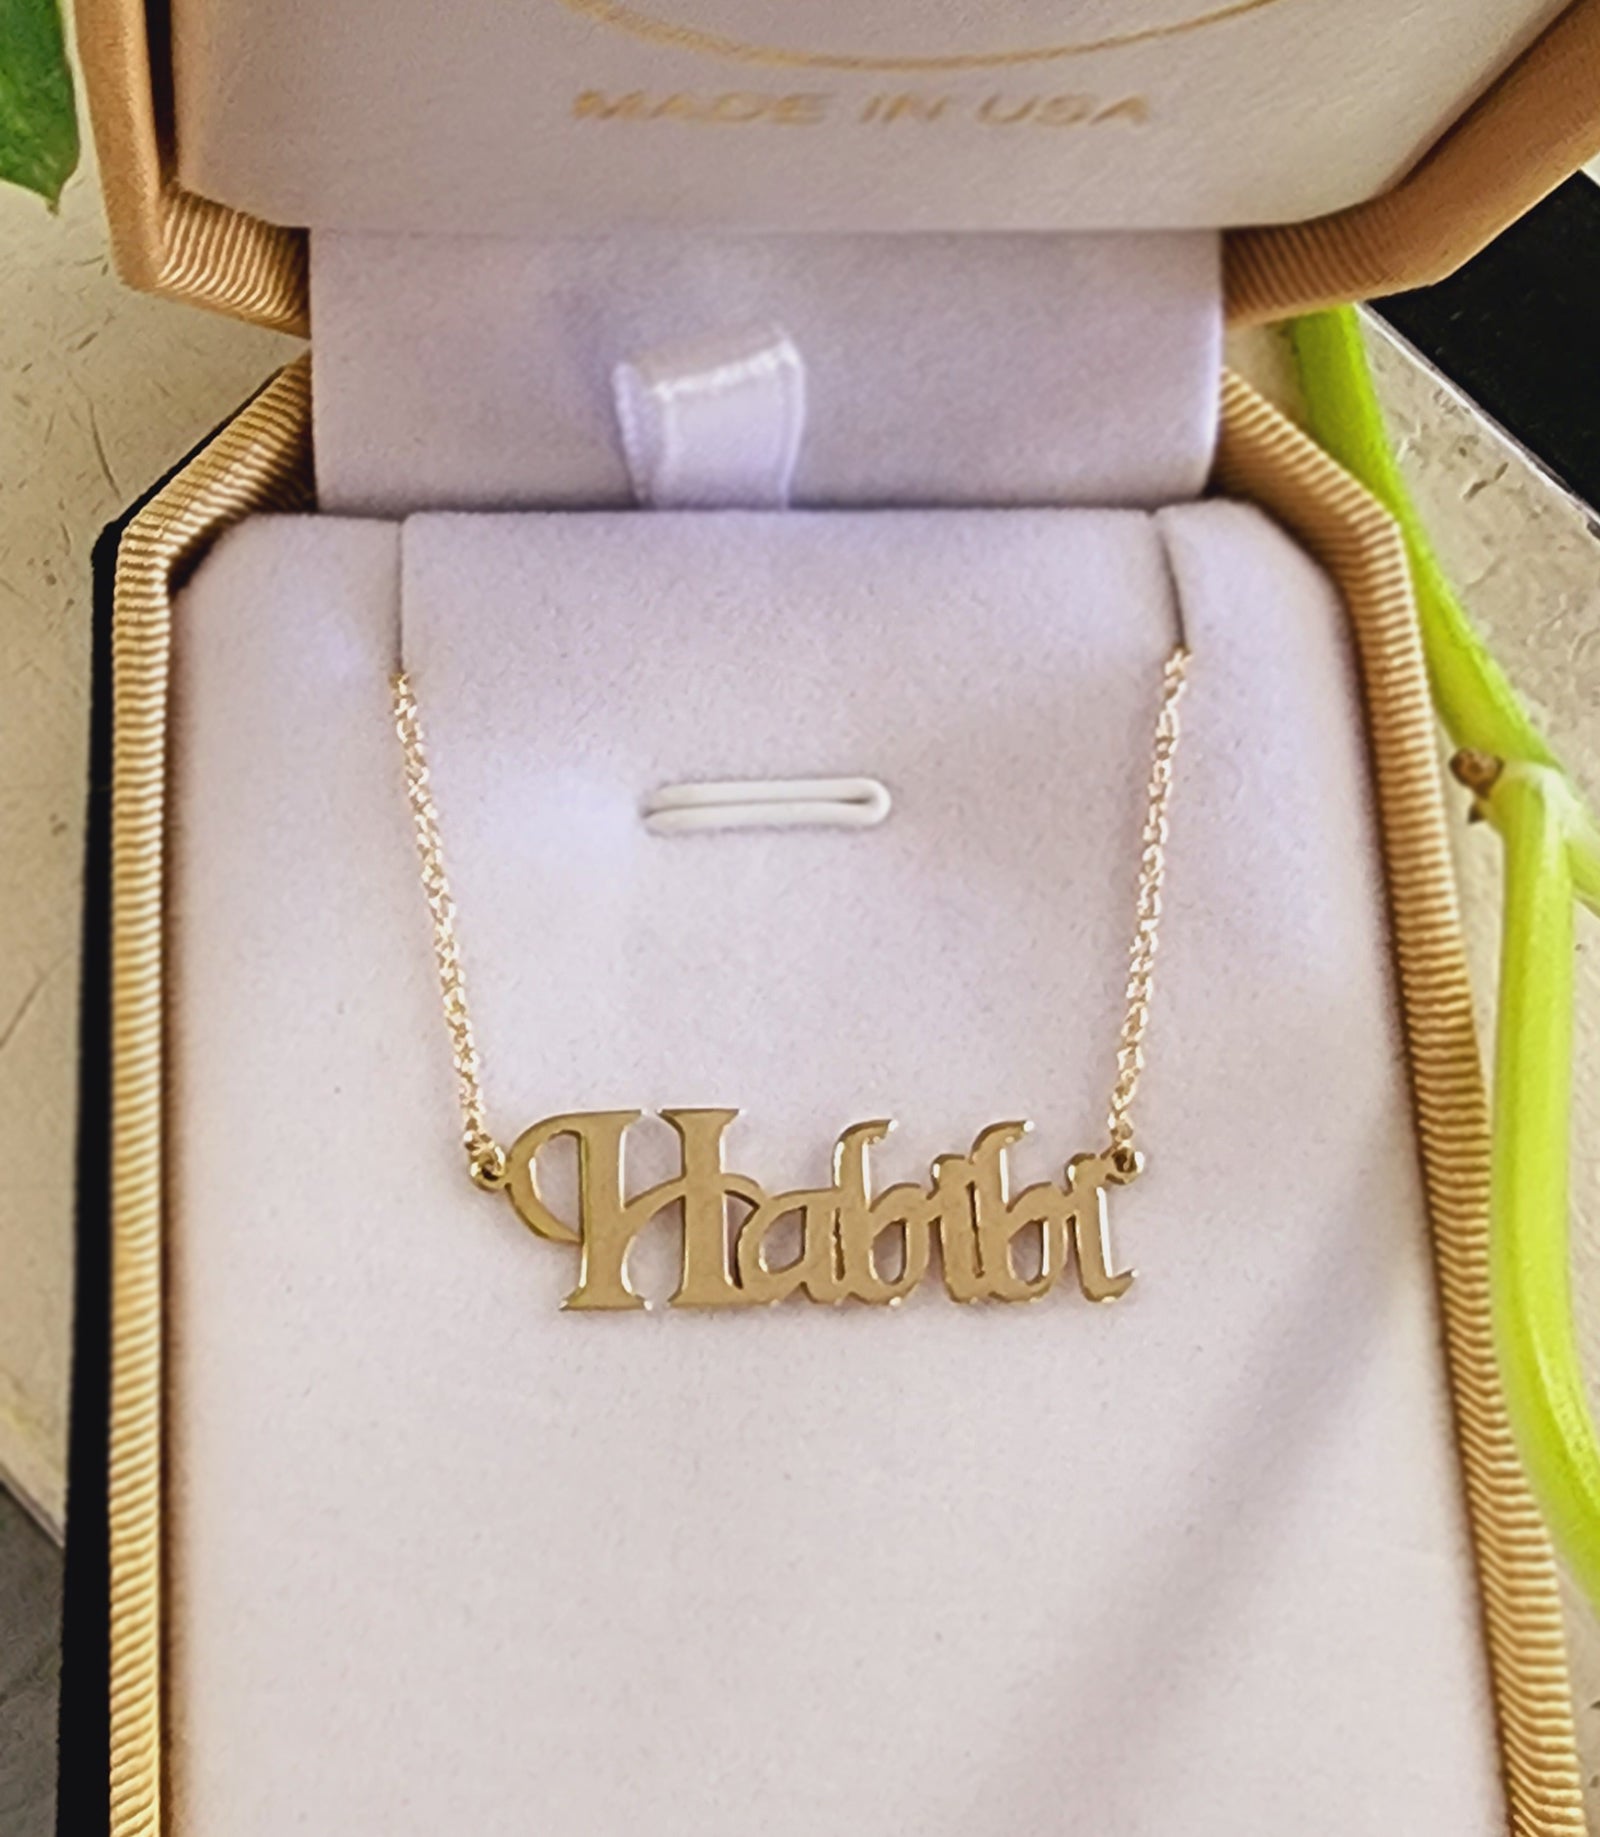 Customized name Necklace in 14k Solid Gold Plate -18 inch rope chain 1.15mm